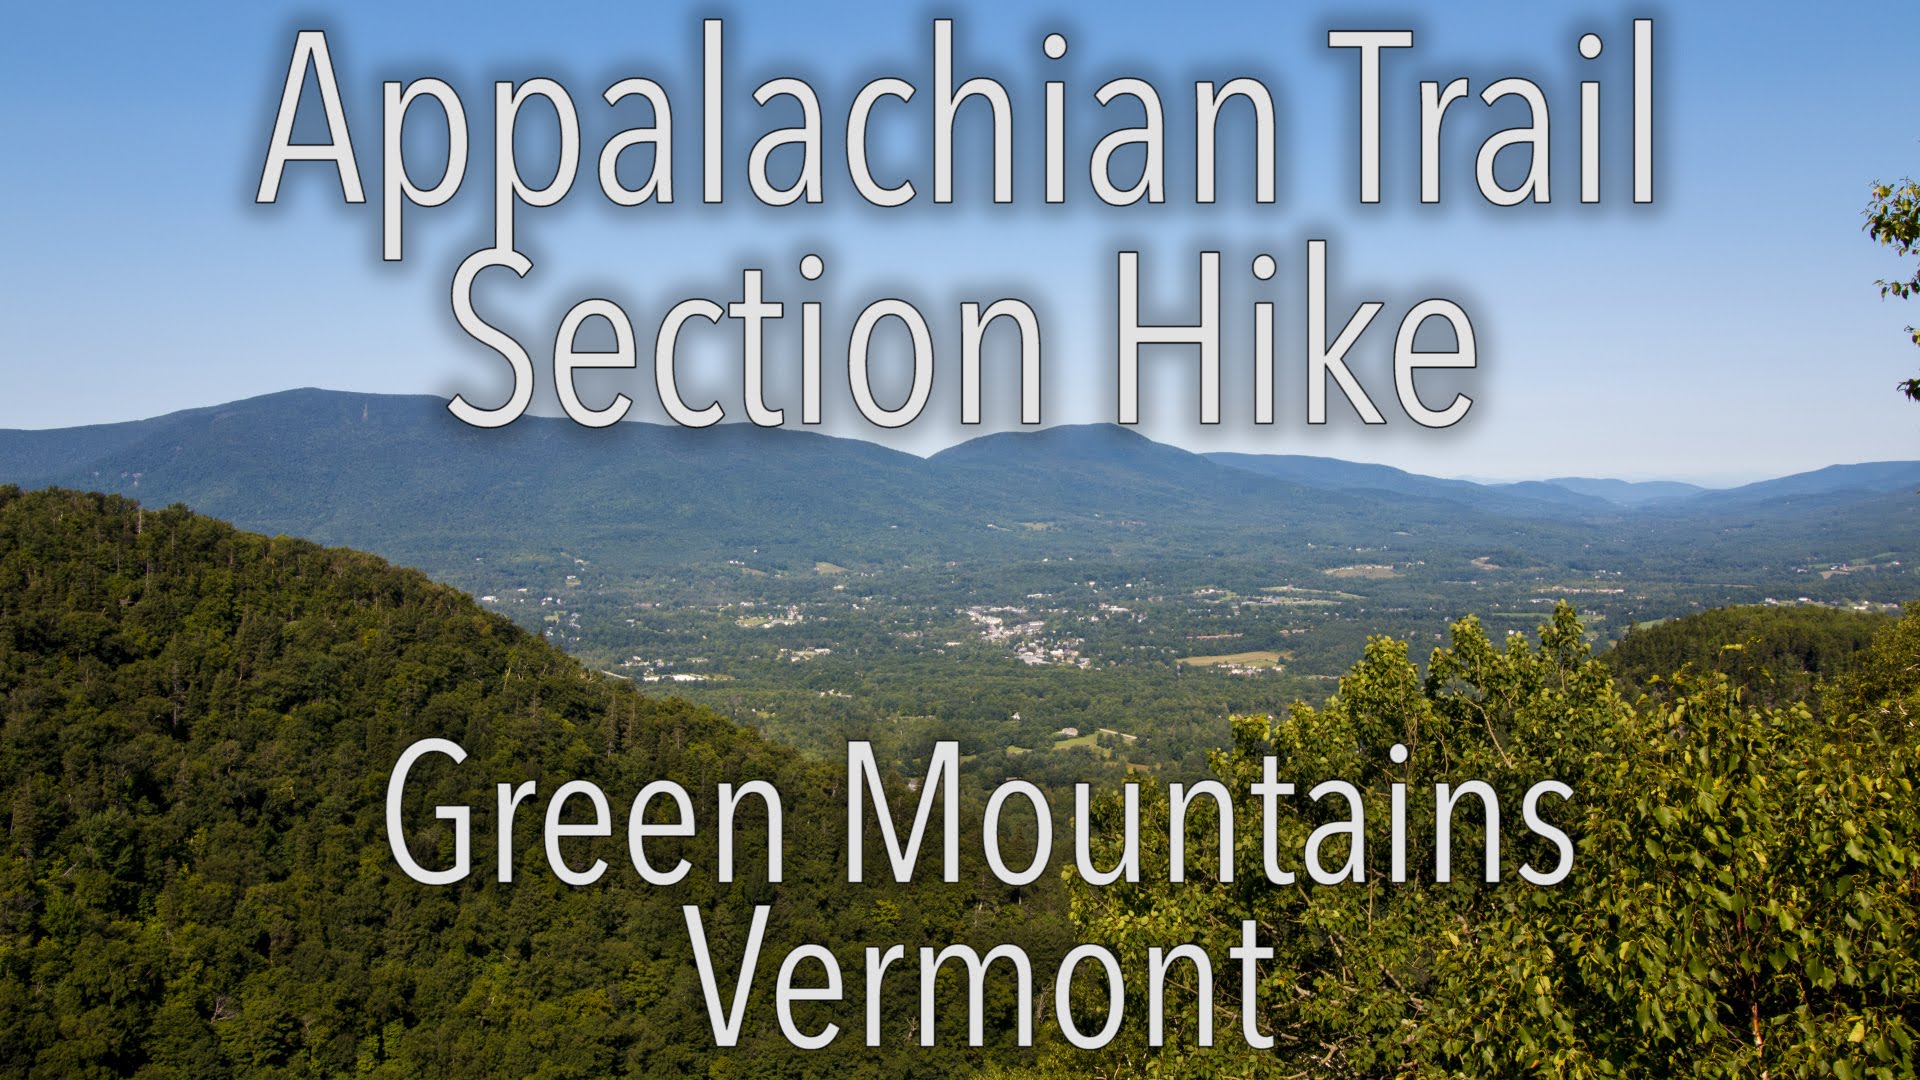 Appalachian Trail Section Hike - Green Mountains, Vermont - YouTube